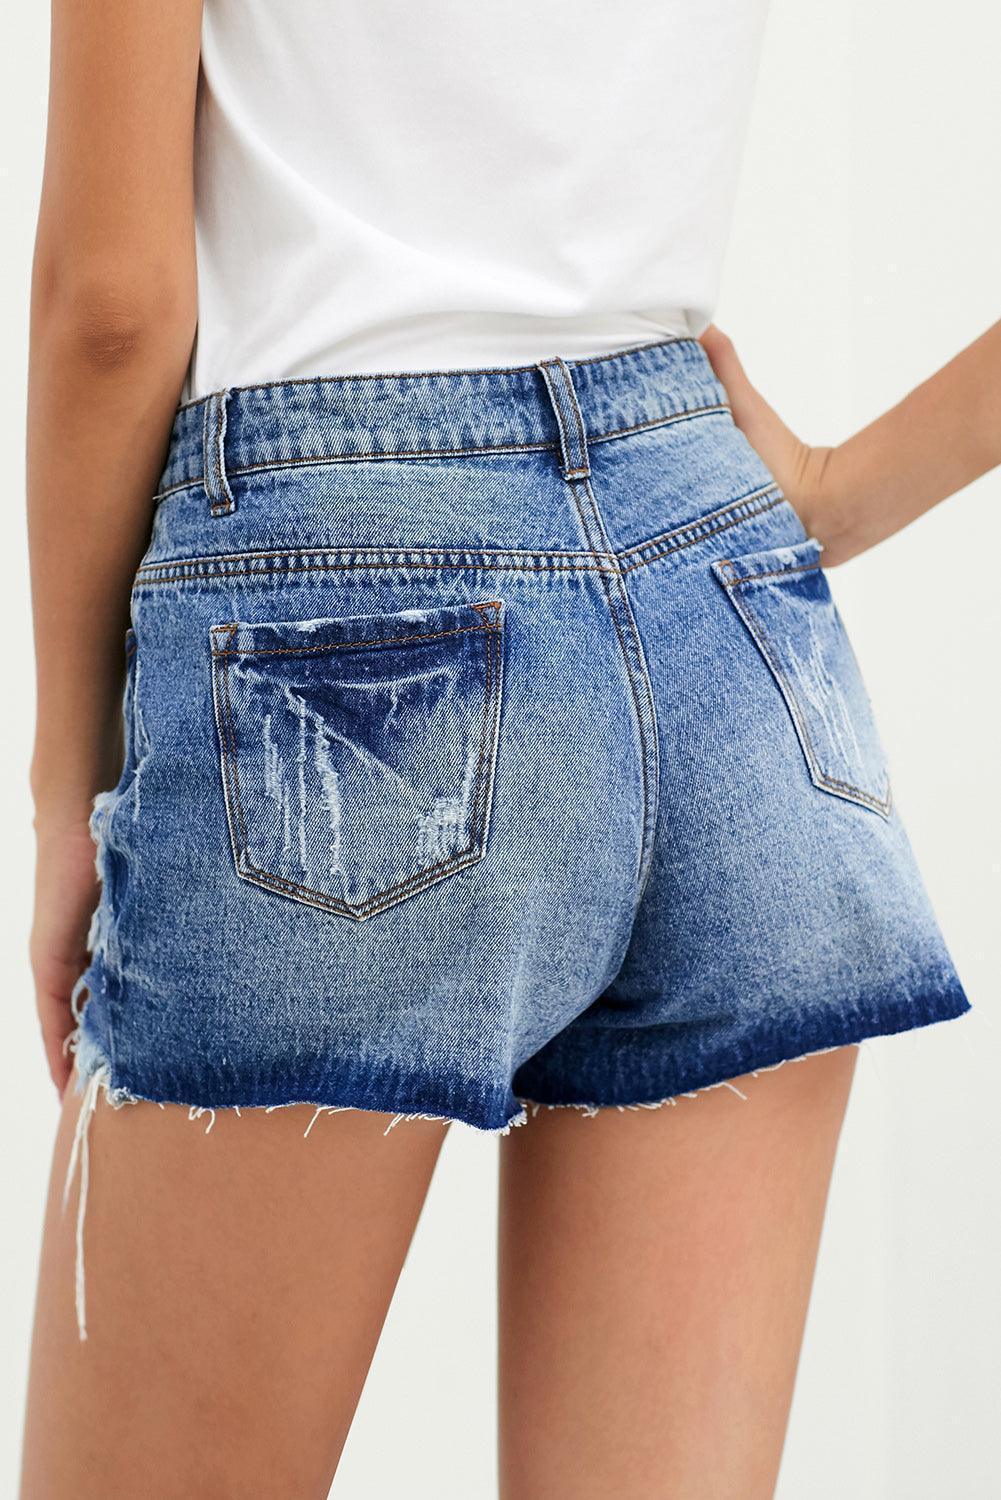 Carefree Button Fly Mid Rise Distressed Denim Shorts - MXSTUDIO.COM